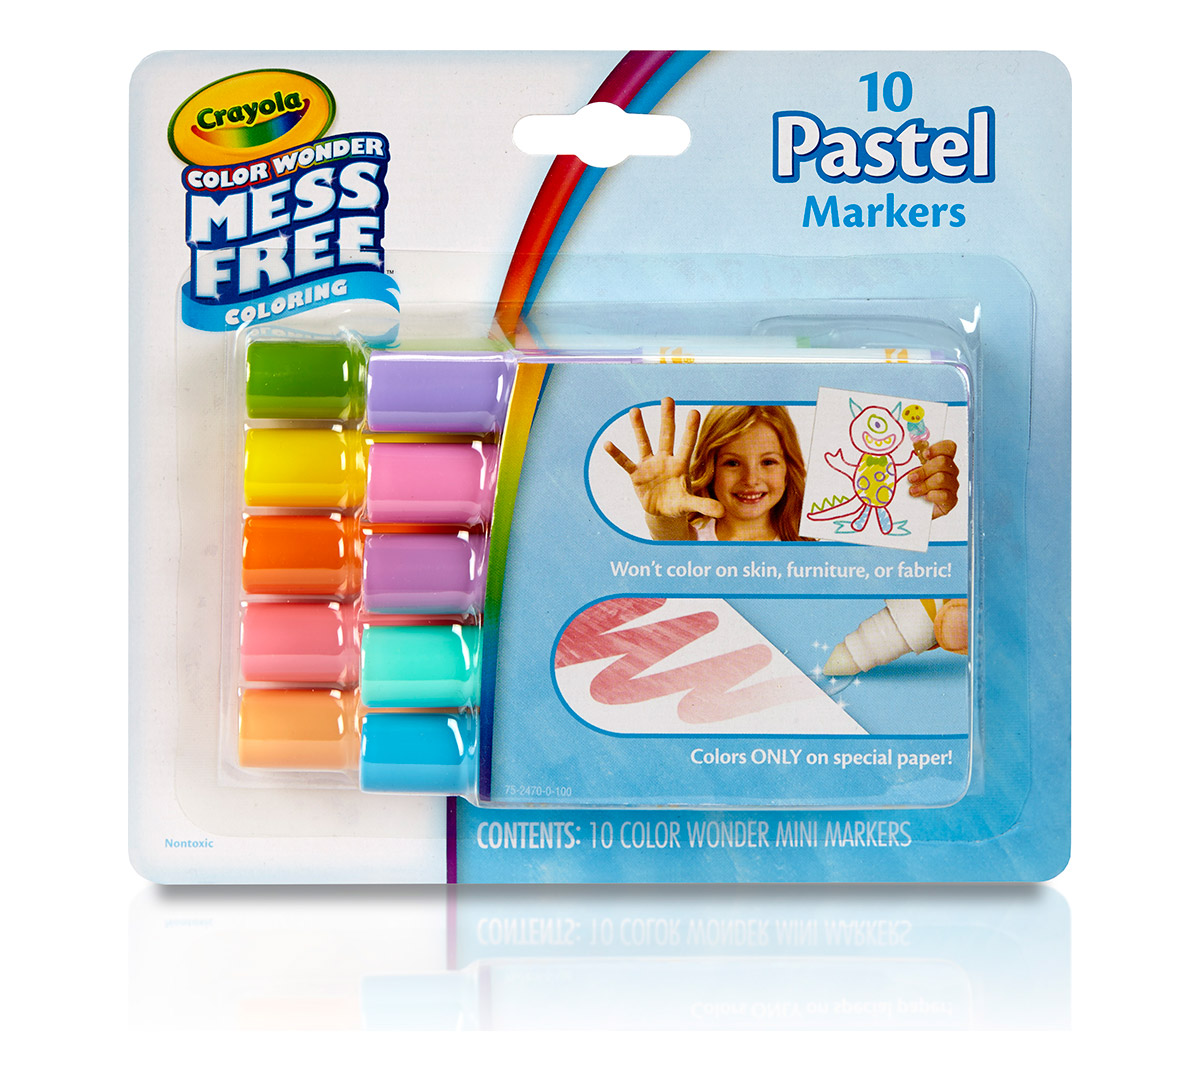 Download Color Wonder Mess Free Mini Markers, Pastel Colors, 10 Count | Crayola